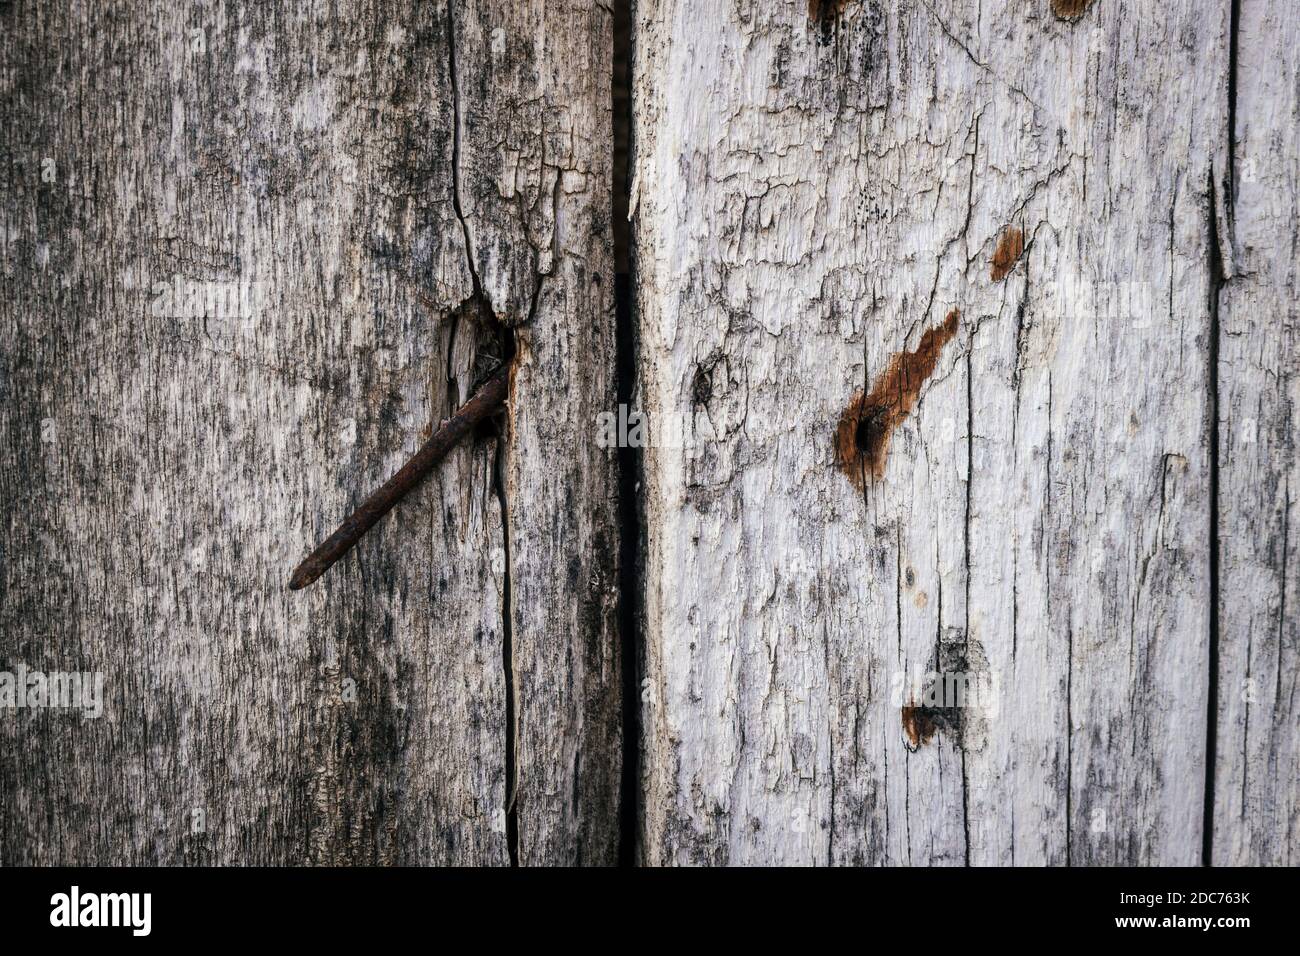 Texture of old wooden planks with lots of cracks, scratches, holes and rusty nails. Close up. Stock Photo